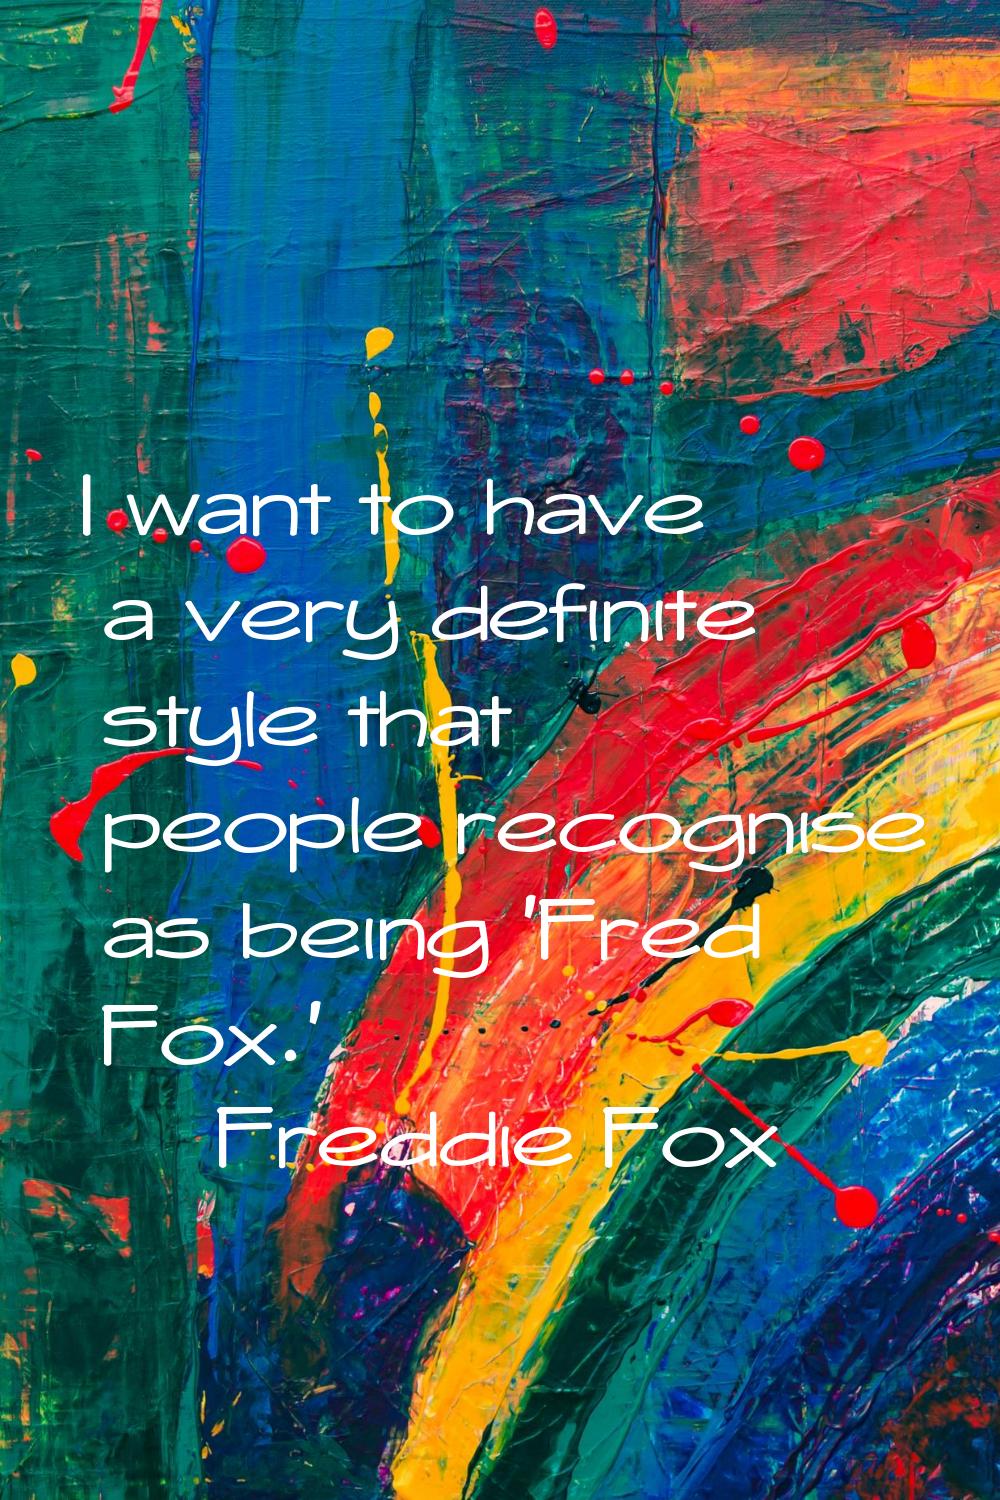 I want to have a very definite style that people recognise as being 'Fred Fox.'